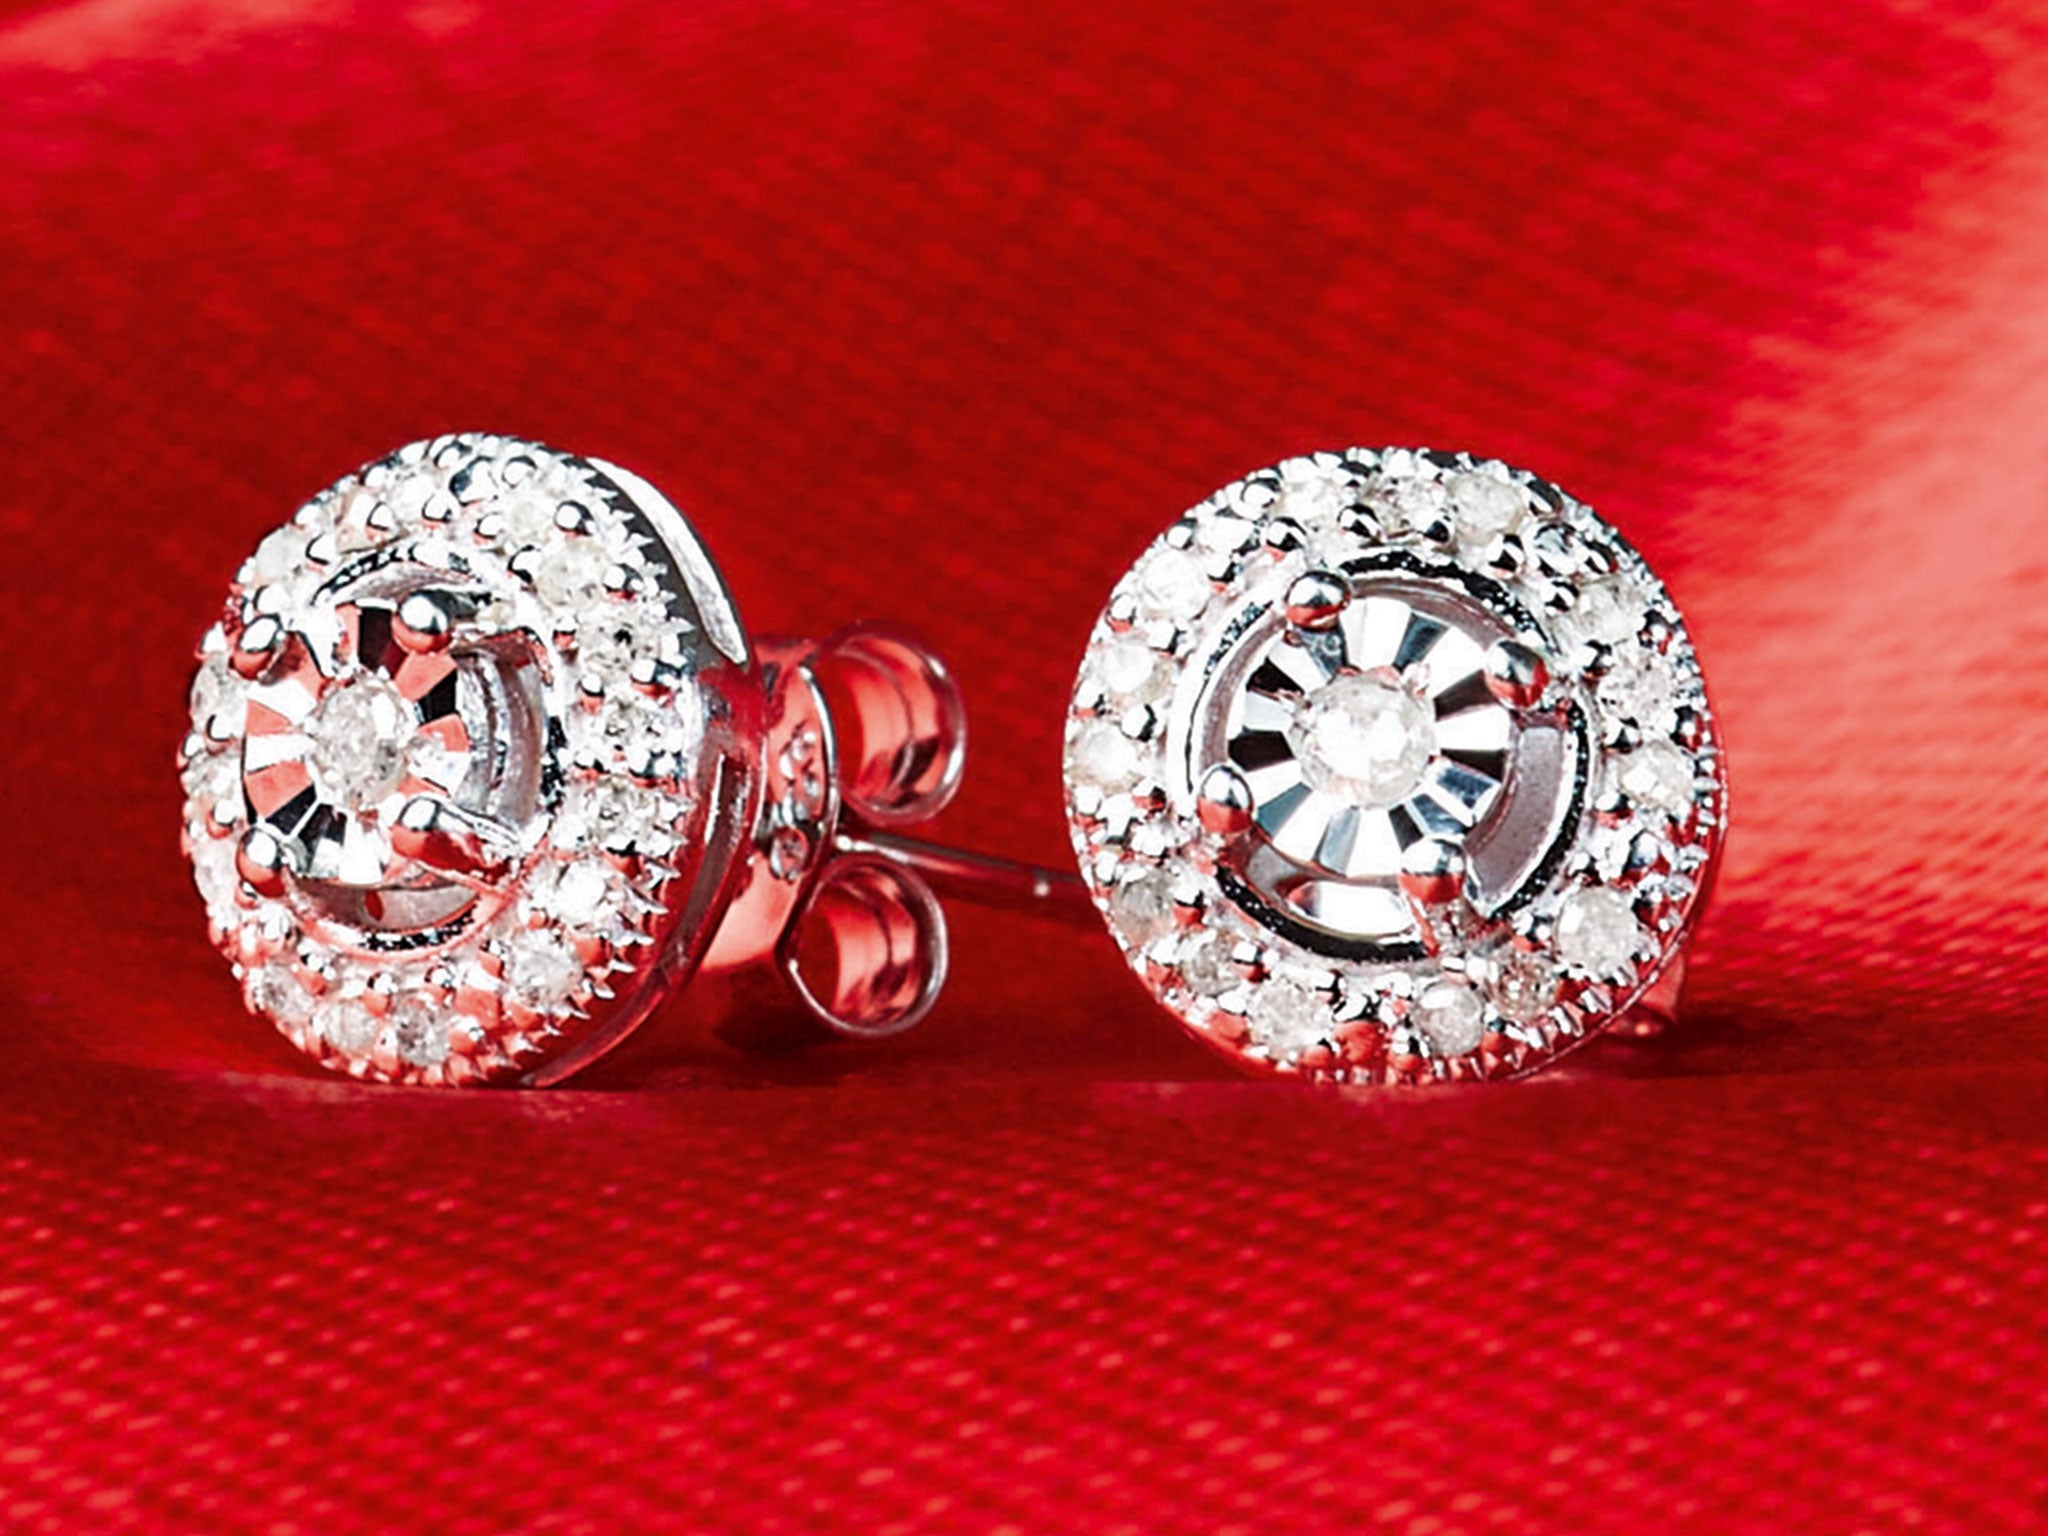 Discover more than 151 most beautiful diamond earrings super hot ...